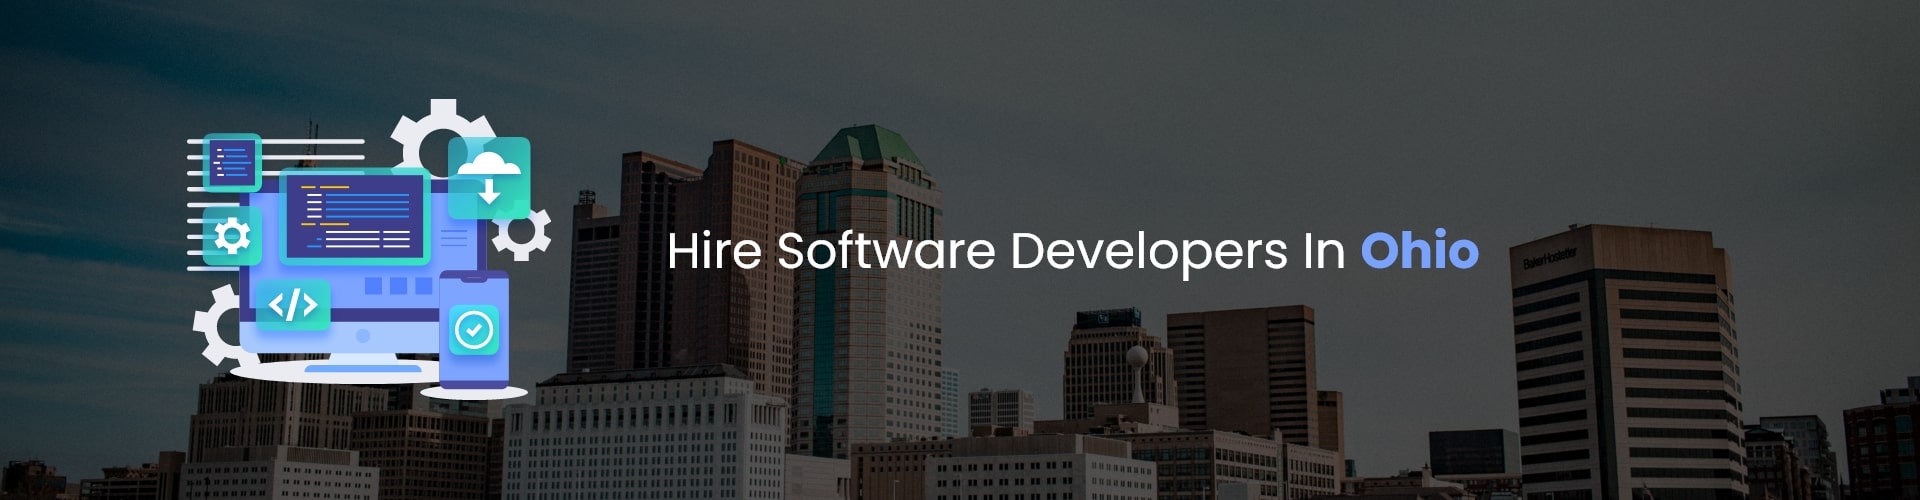 hire software developers in ohio